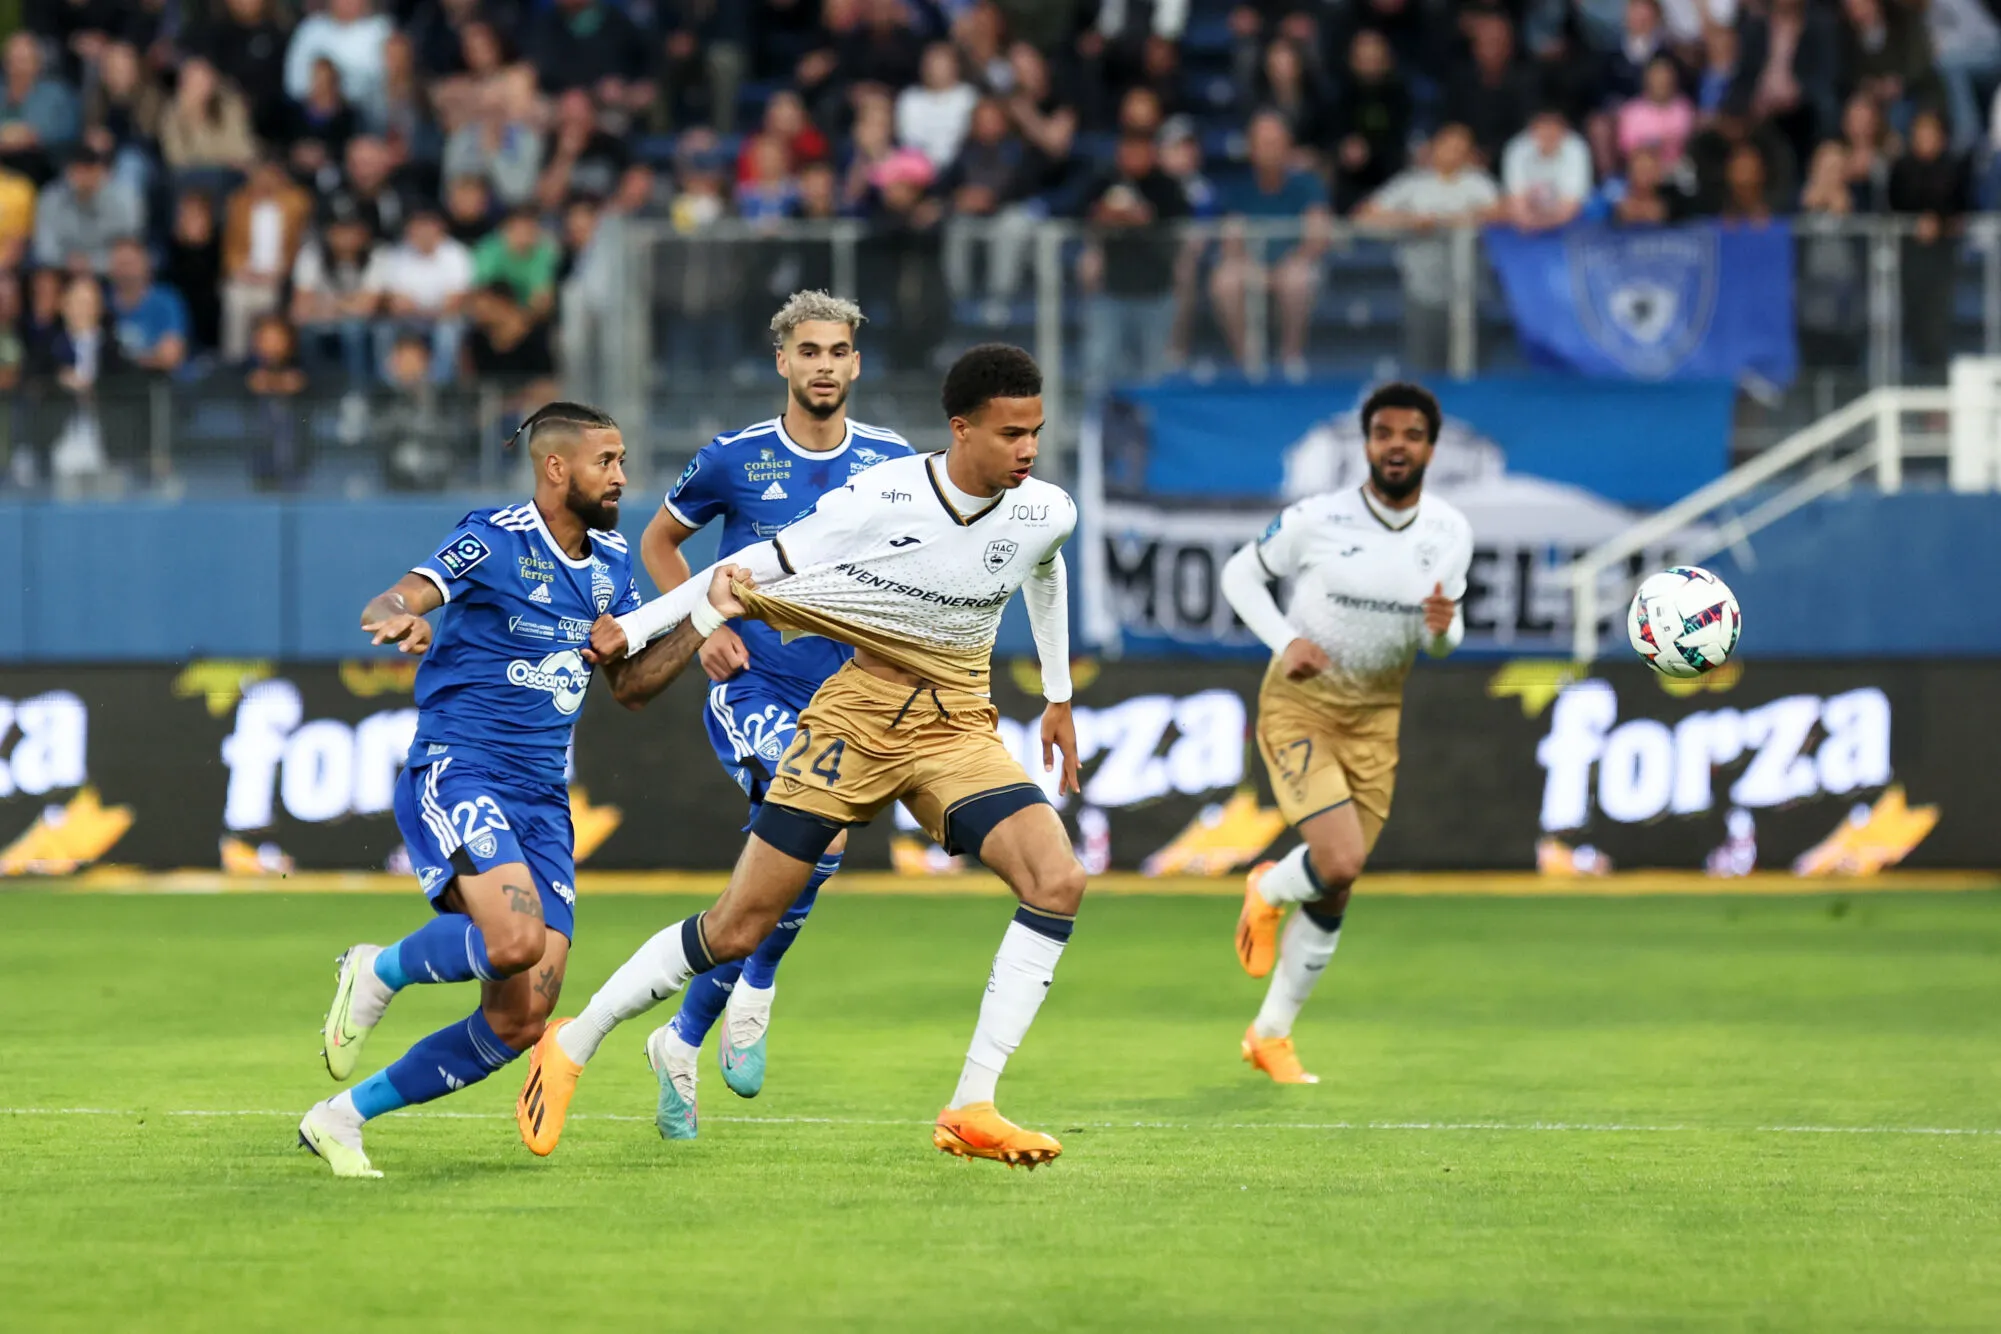 23 Lloyd PALUN (scb) - 24 Michael Amir RICHARDSON (hac) during the Ligue 2 BKT match between Bastia and Le Havre at Stade Armand Cesari on May 26, 2023 in Bastia, France. (Photo by Johnny Fidelin/FEP/Icon Sport)